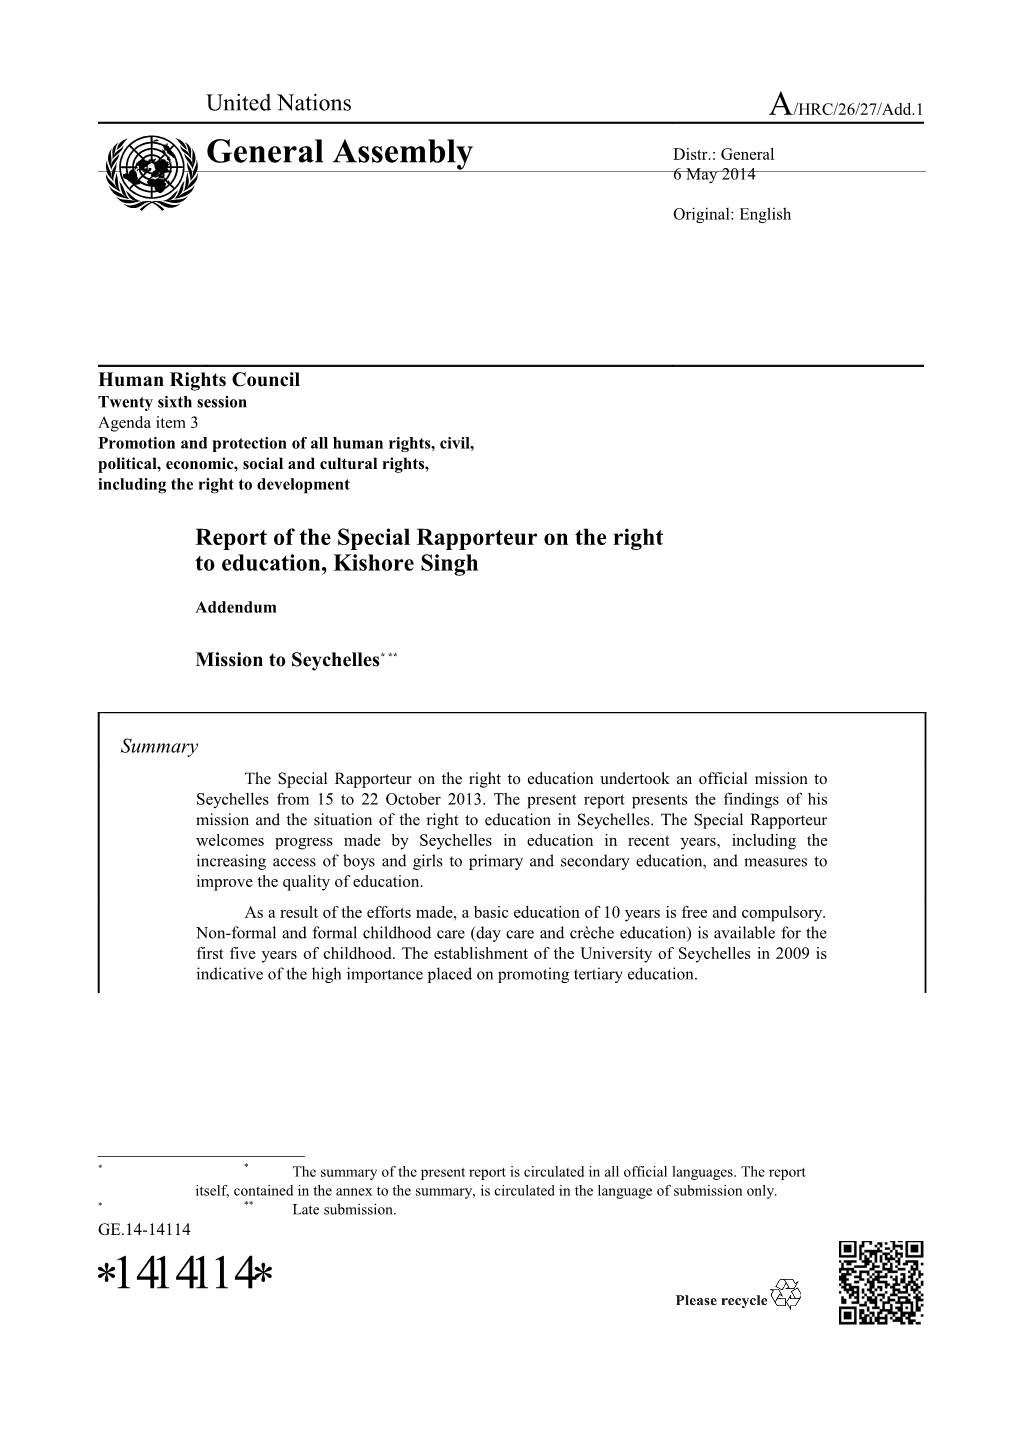 Report of the Special Rapporteur on the Right to Education, Kishore Singh, Addendum - Mission